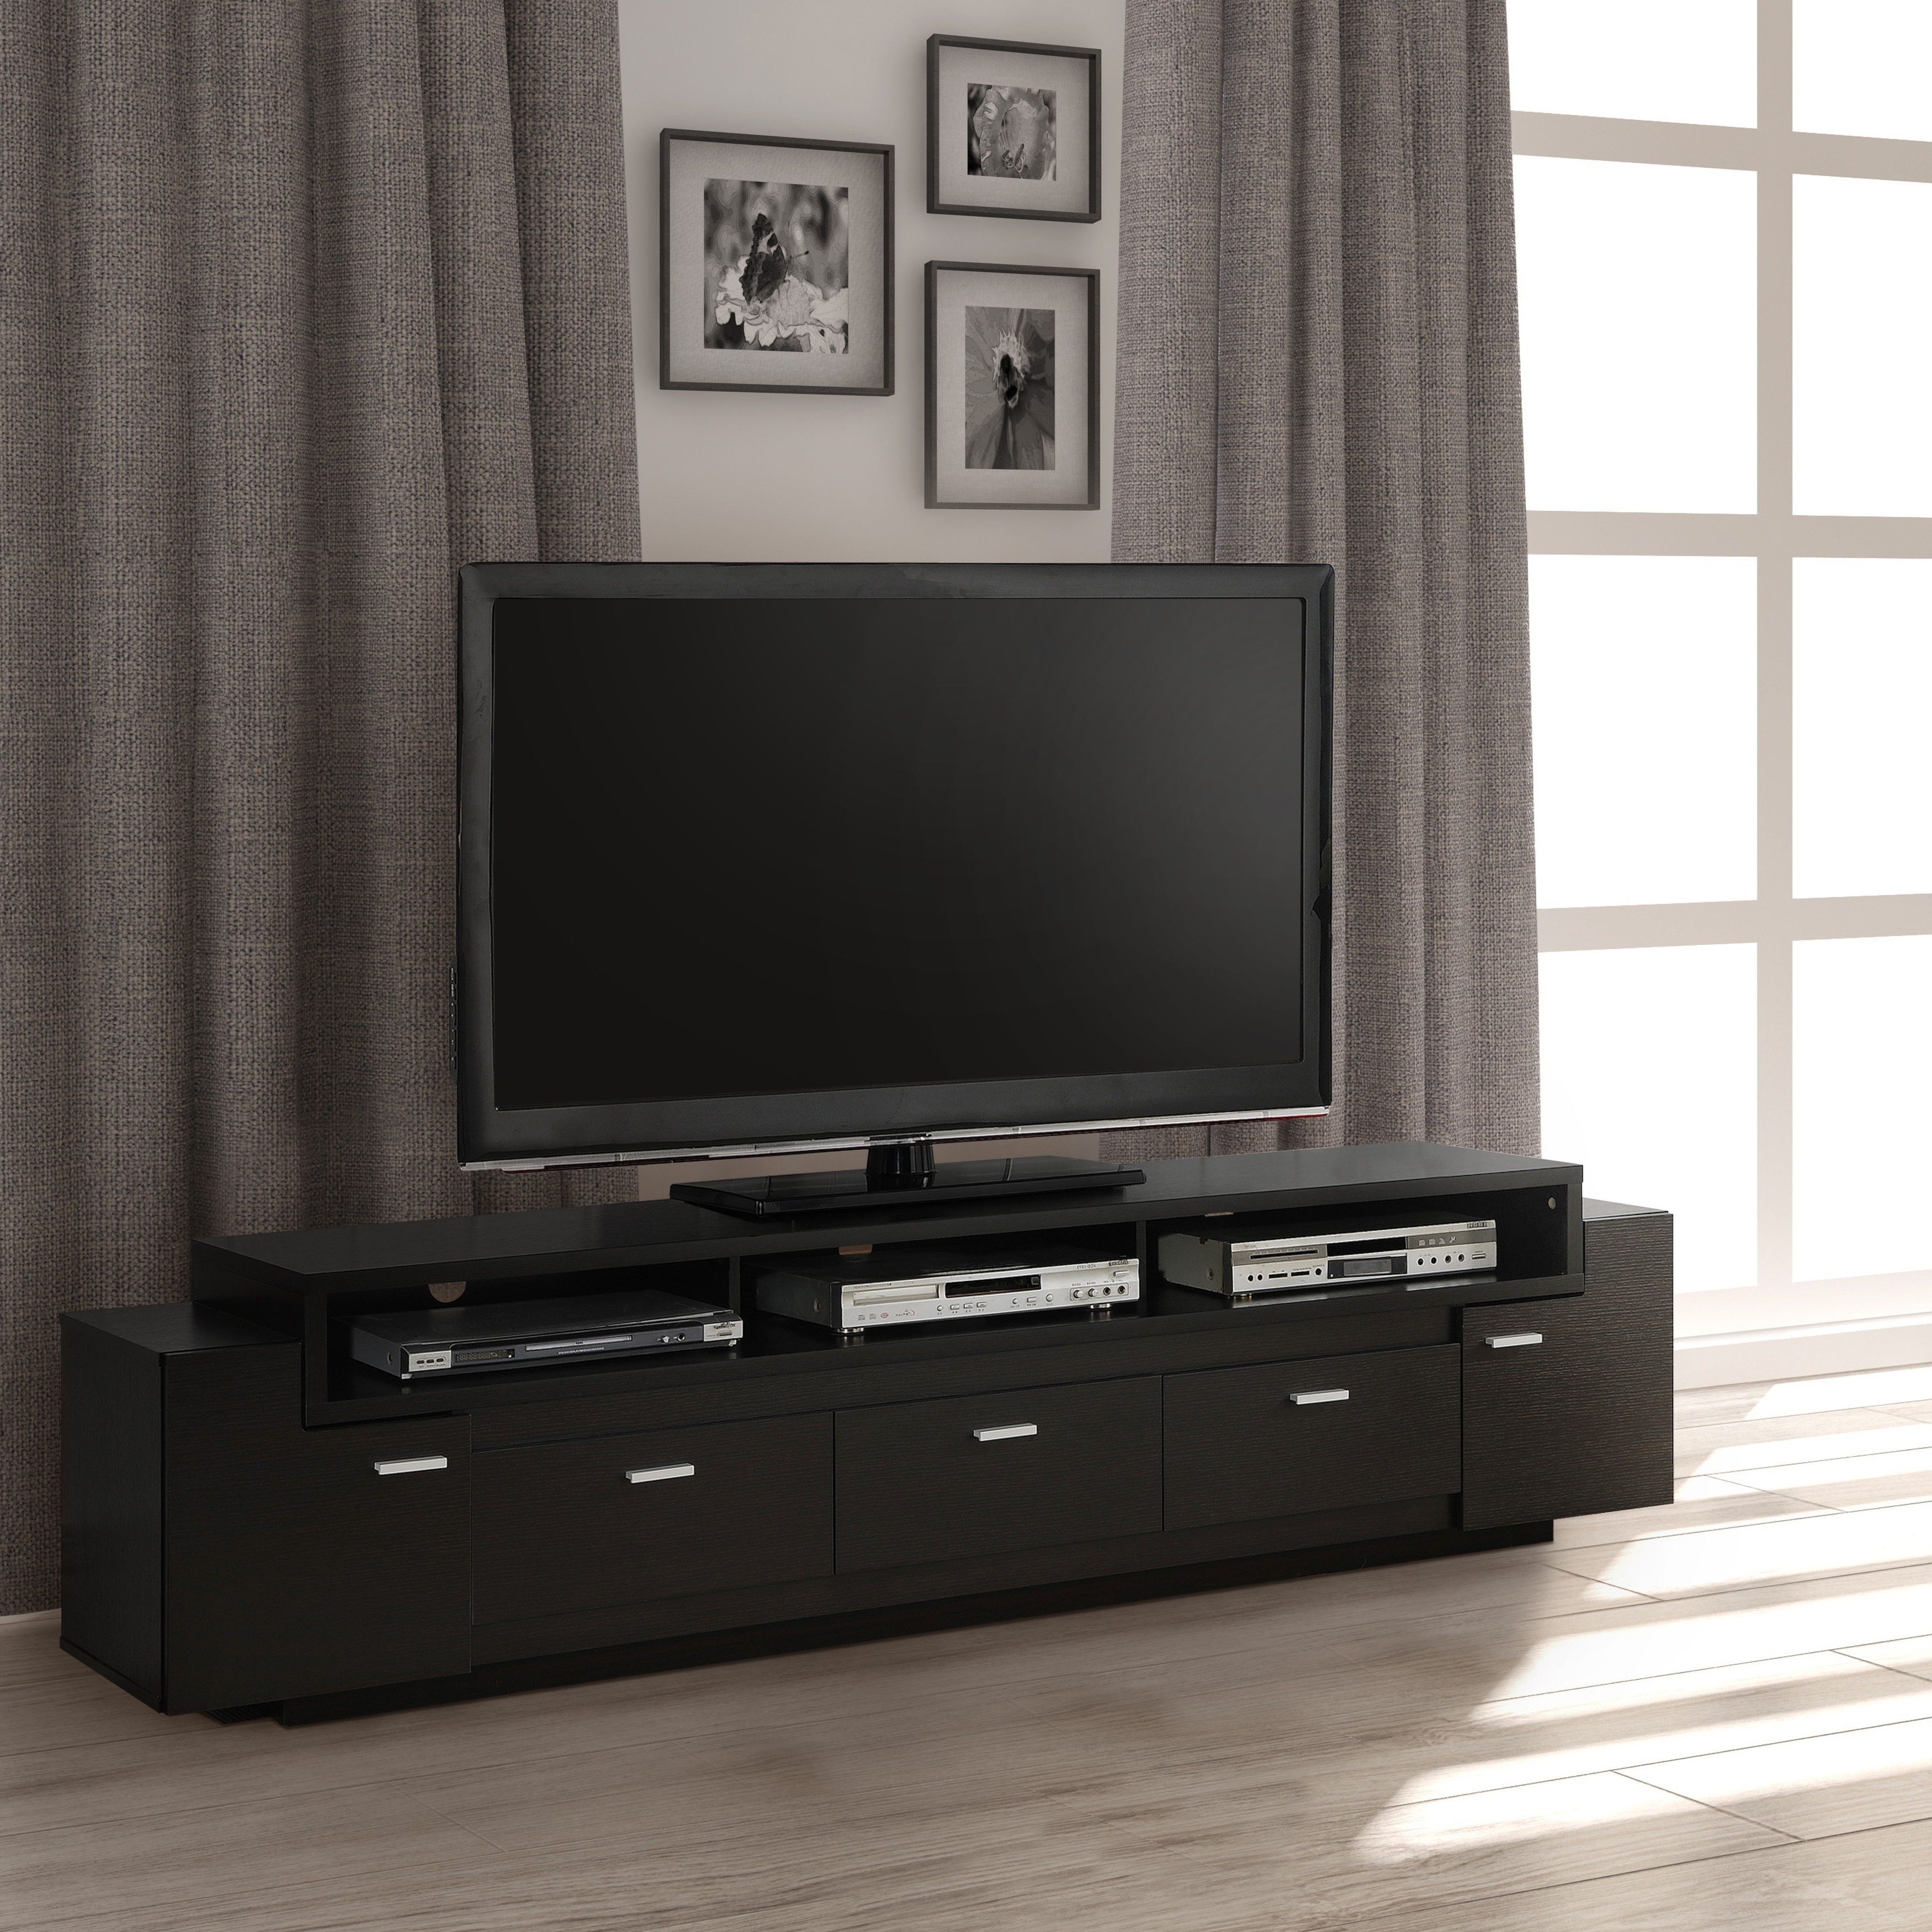 Wide Tv Cabinets Intended For Famous Shop Porch & Den Hubbard 84 Inch Tiered Tv Stand – On Sale – Free (View 19 of 20)